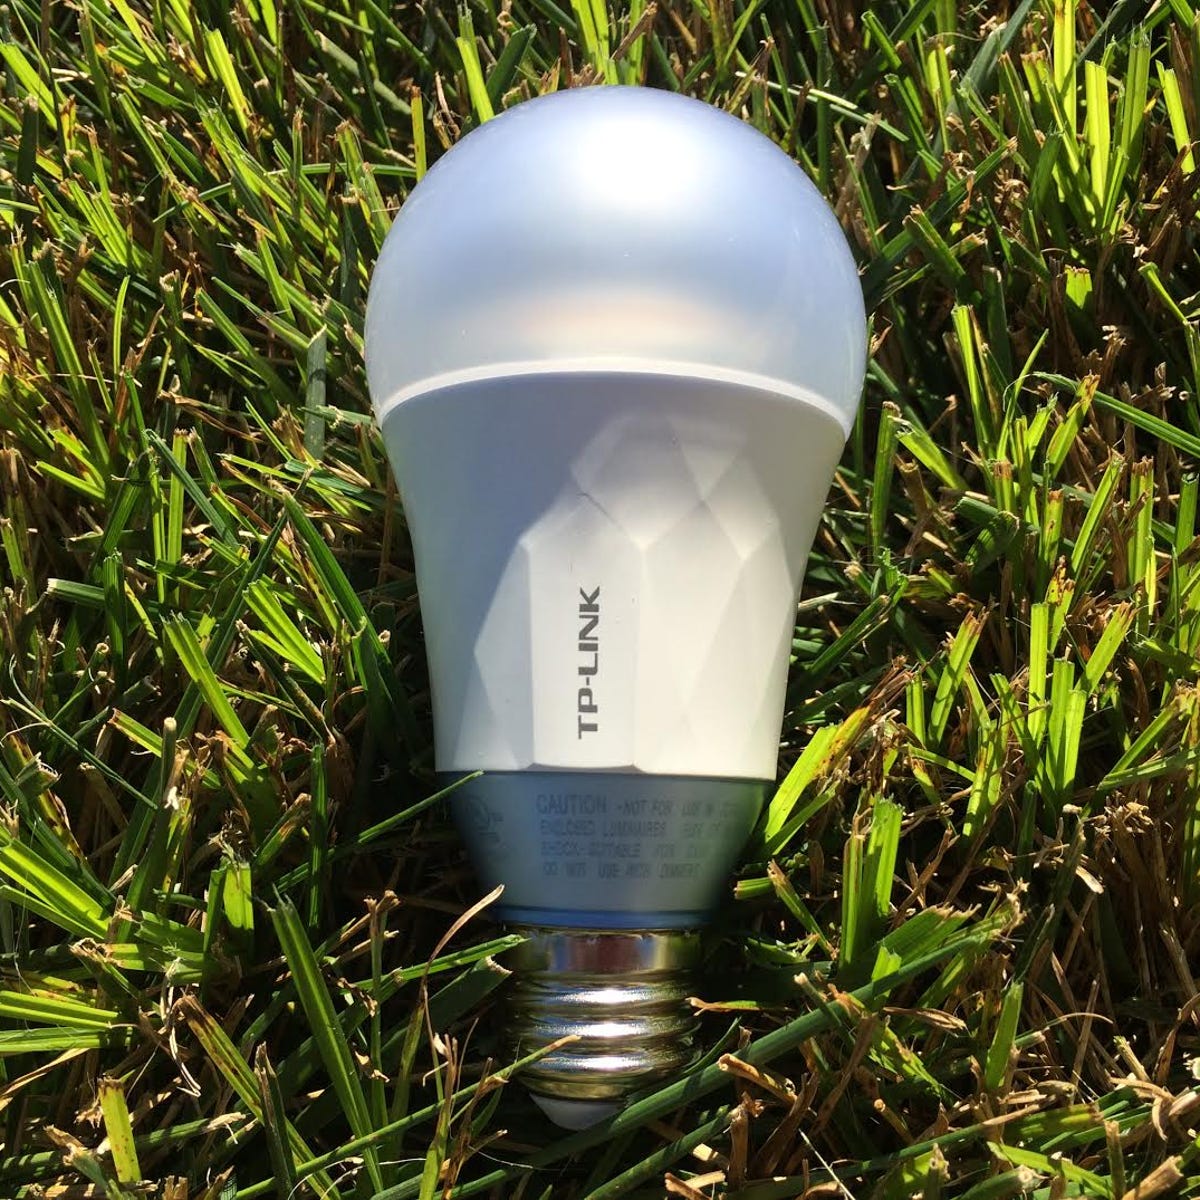 Subordinate promising lack TP-Link LB120 Smart Wi-Fi LED Bulb with Tunable White Light review: TP-Link  introduces affordable, Alexa-ready smart bulbs -- no hub needed - CNET